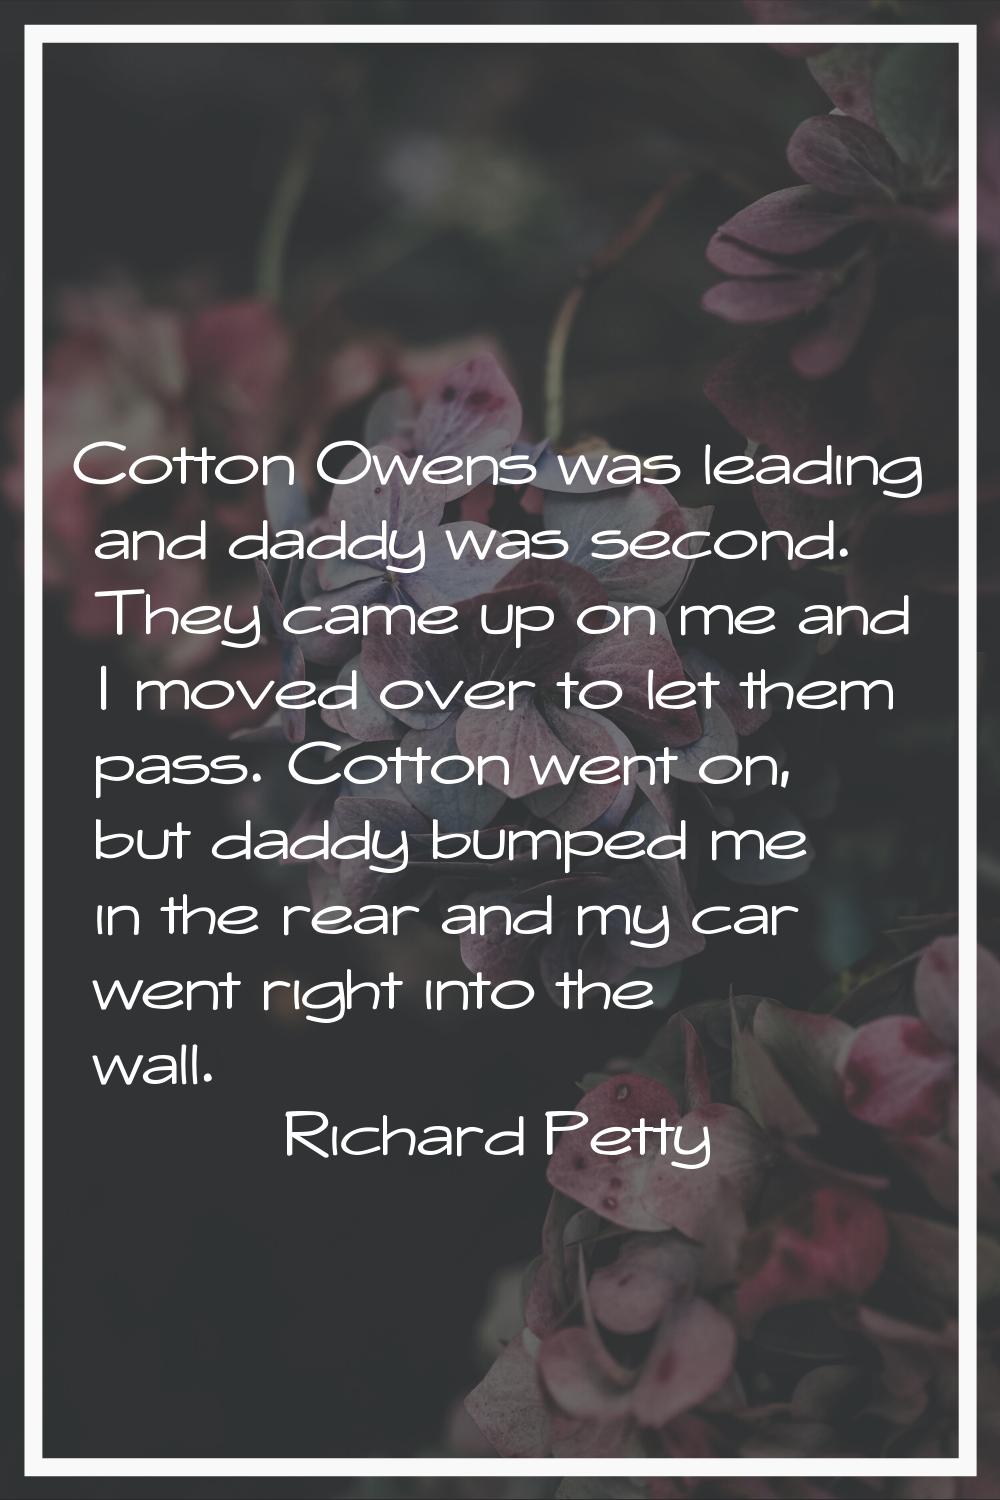 Cotton Owens was leading and daddy was second. They came up on me and I moved over to let them pass